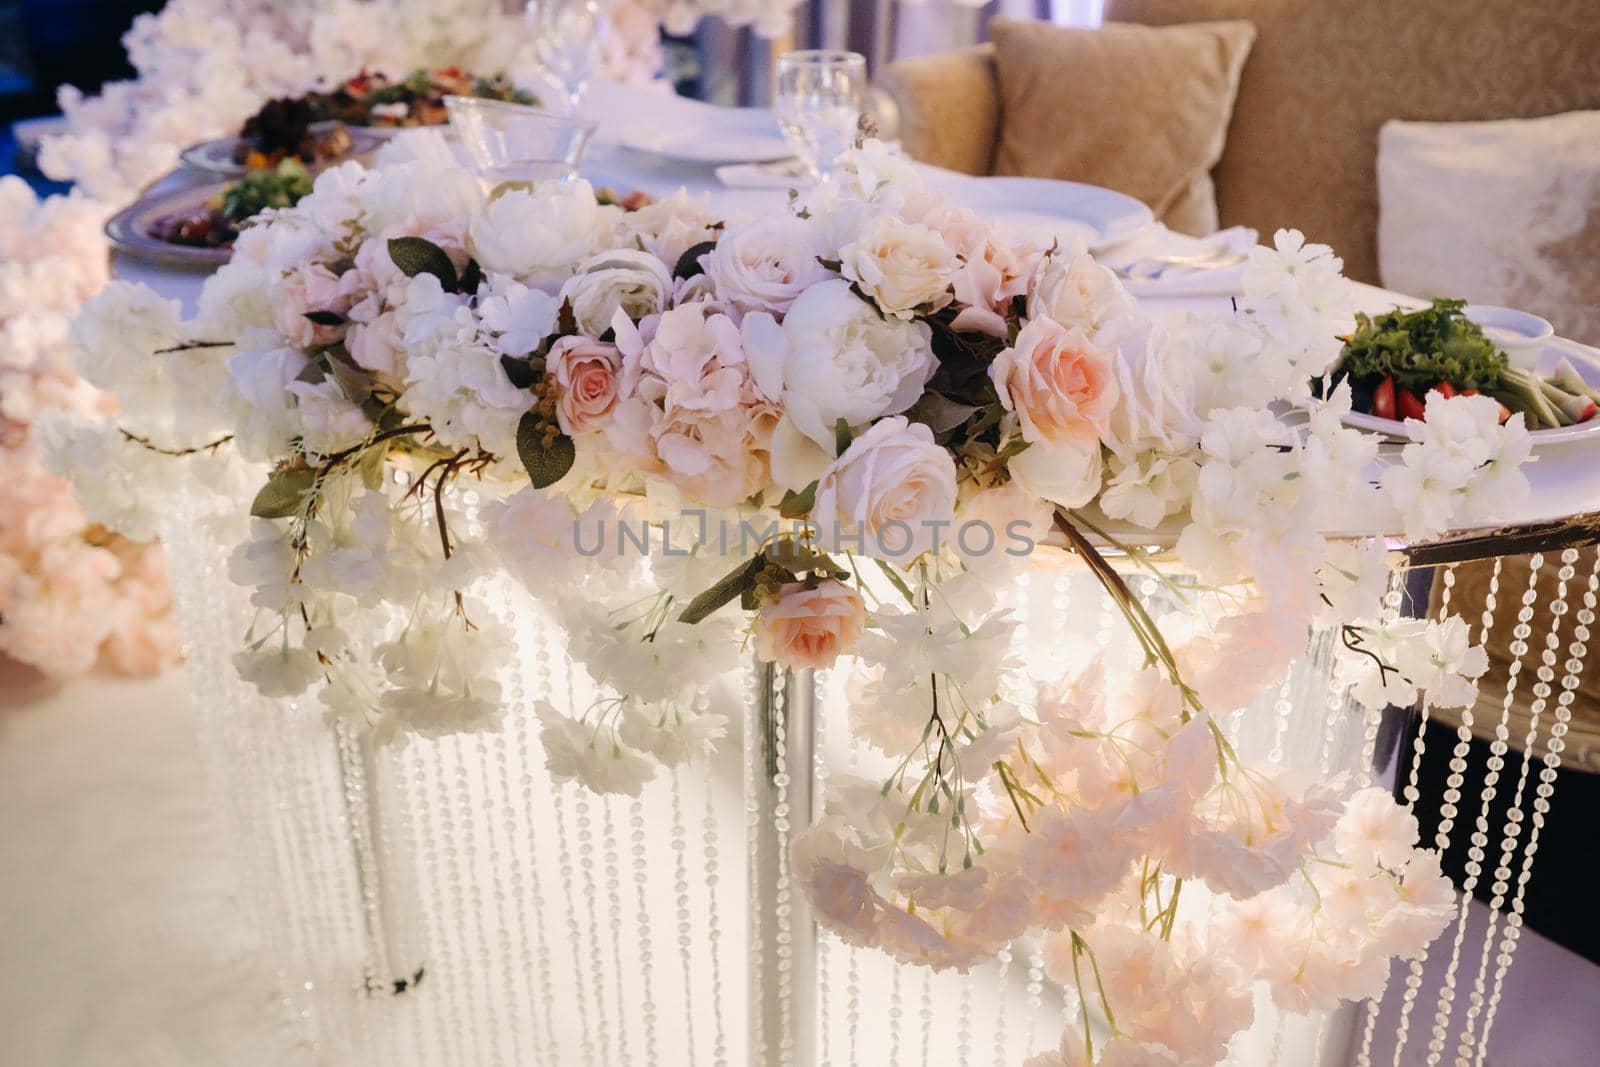 Decorated Table for a wedding reception in a restaurant .Wedding decor.